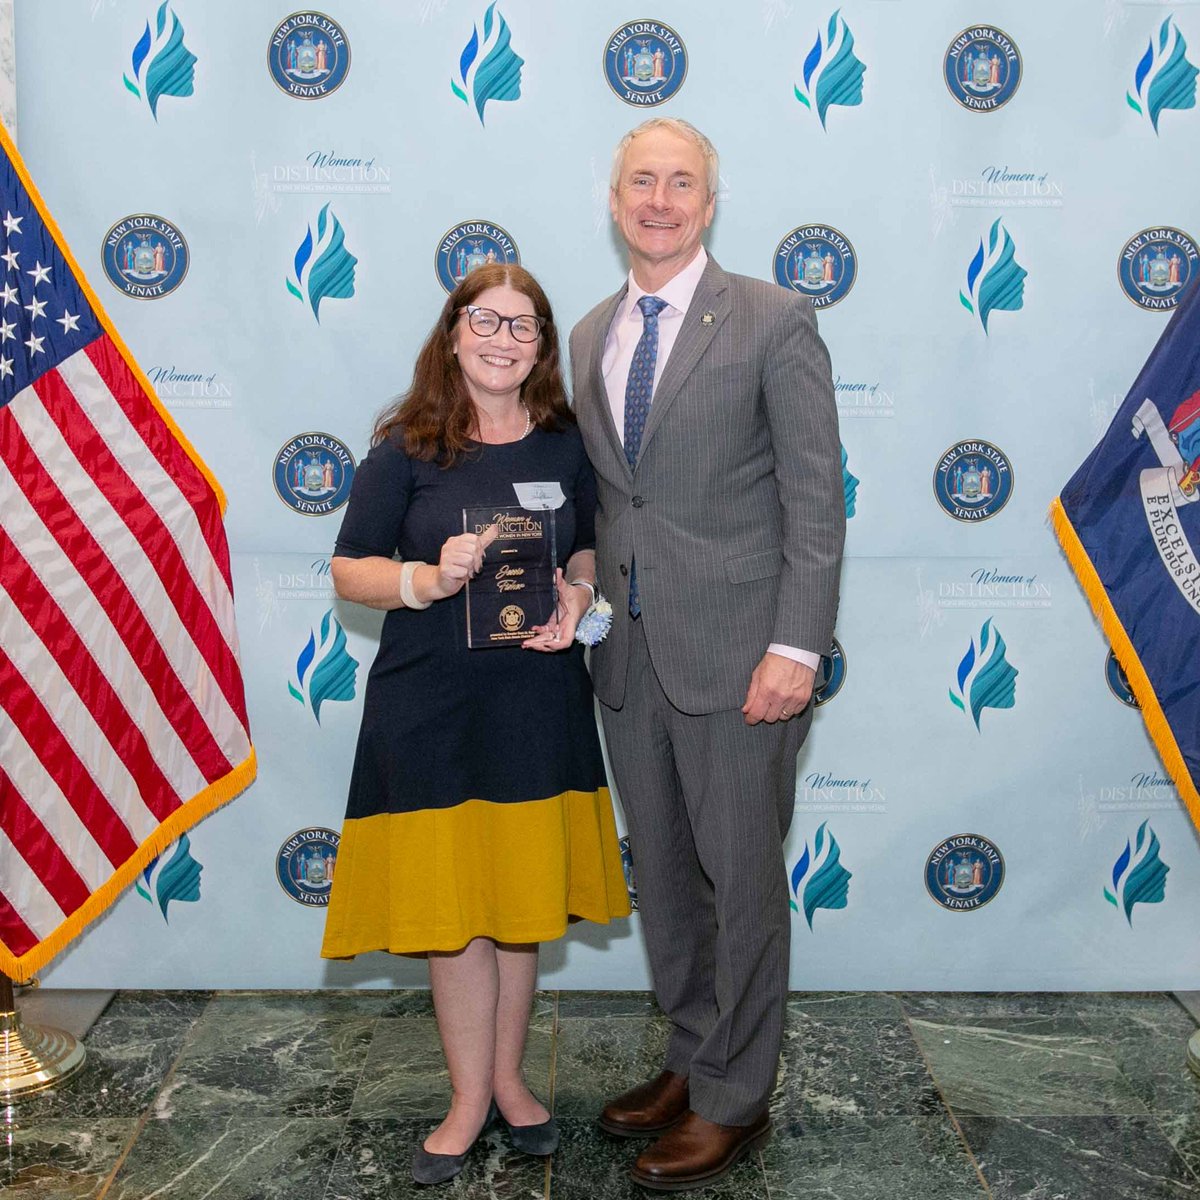 My nominee for this year's @NYSenate Women of Distinction Awards is Jessie Fisher, Executive Director of @TheMartinHouse. Previously, Jessie led @PreserveBN and has always been a steadfast ally for the preservation of Buffalo's historic structures & neighborhoods. Congrats!